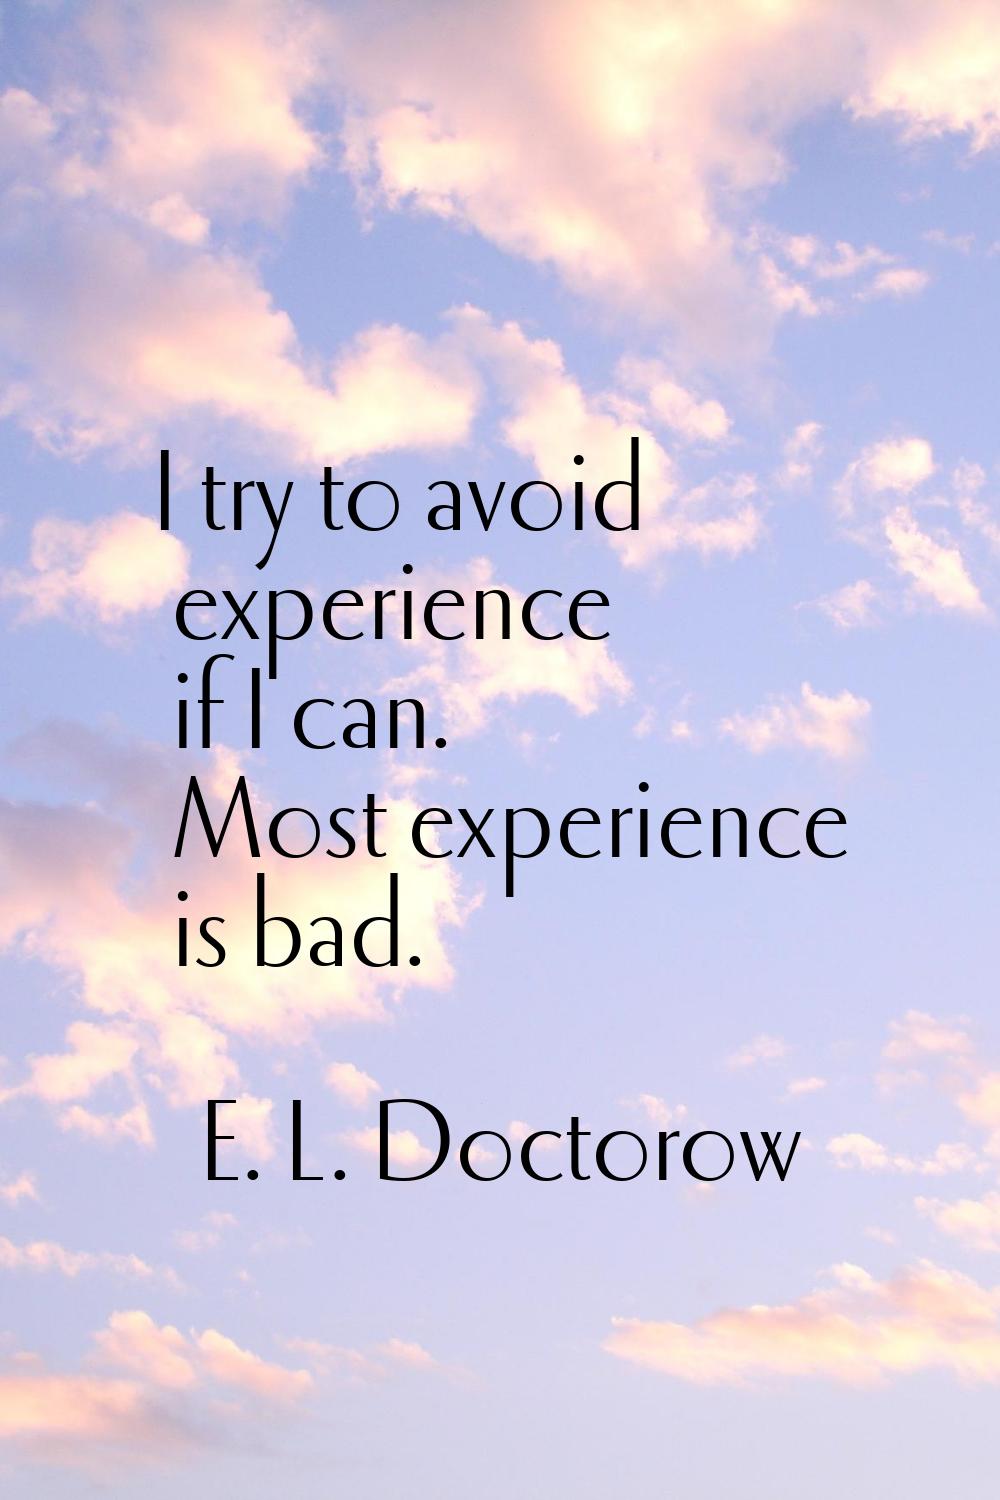 I try to avoid experience if I can. Most experience is bad.